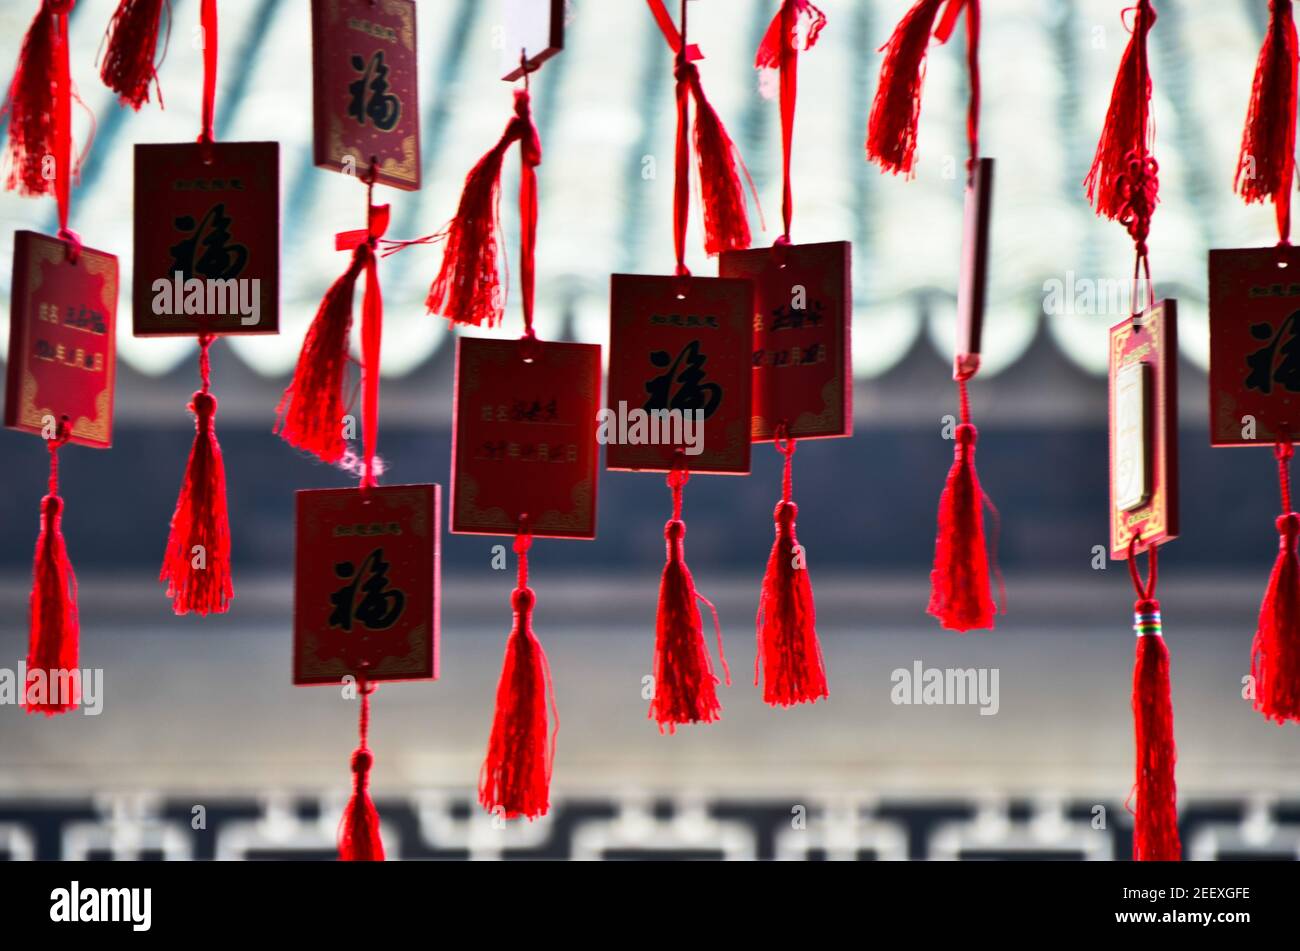 Closeup of Chinese red wish cards hanging in the temple, Tongli, China Stock Photo